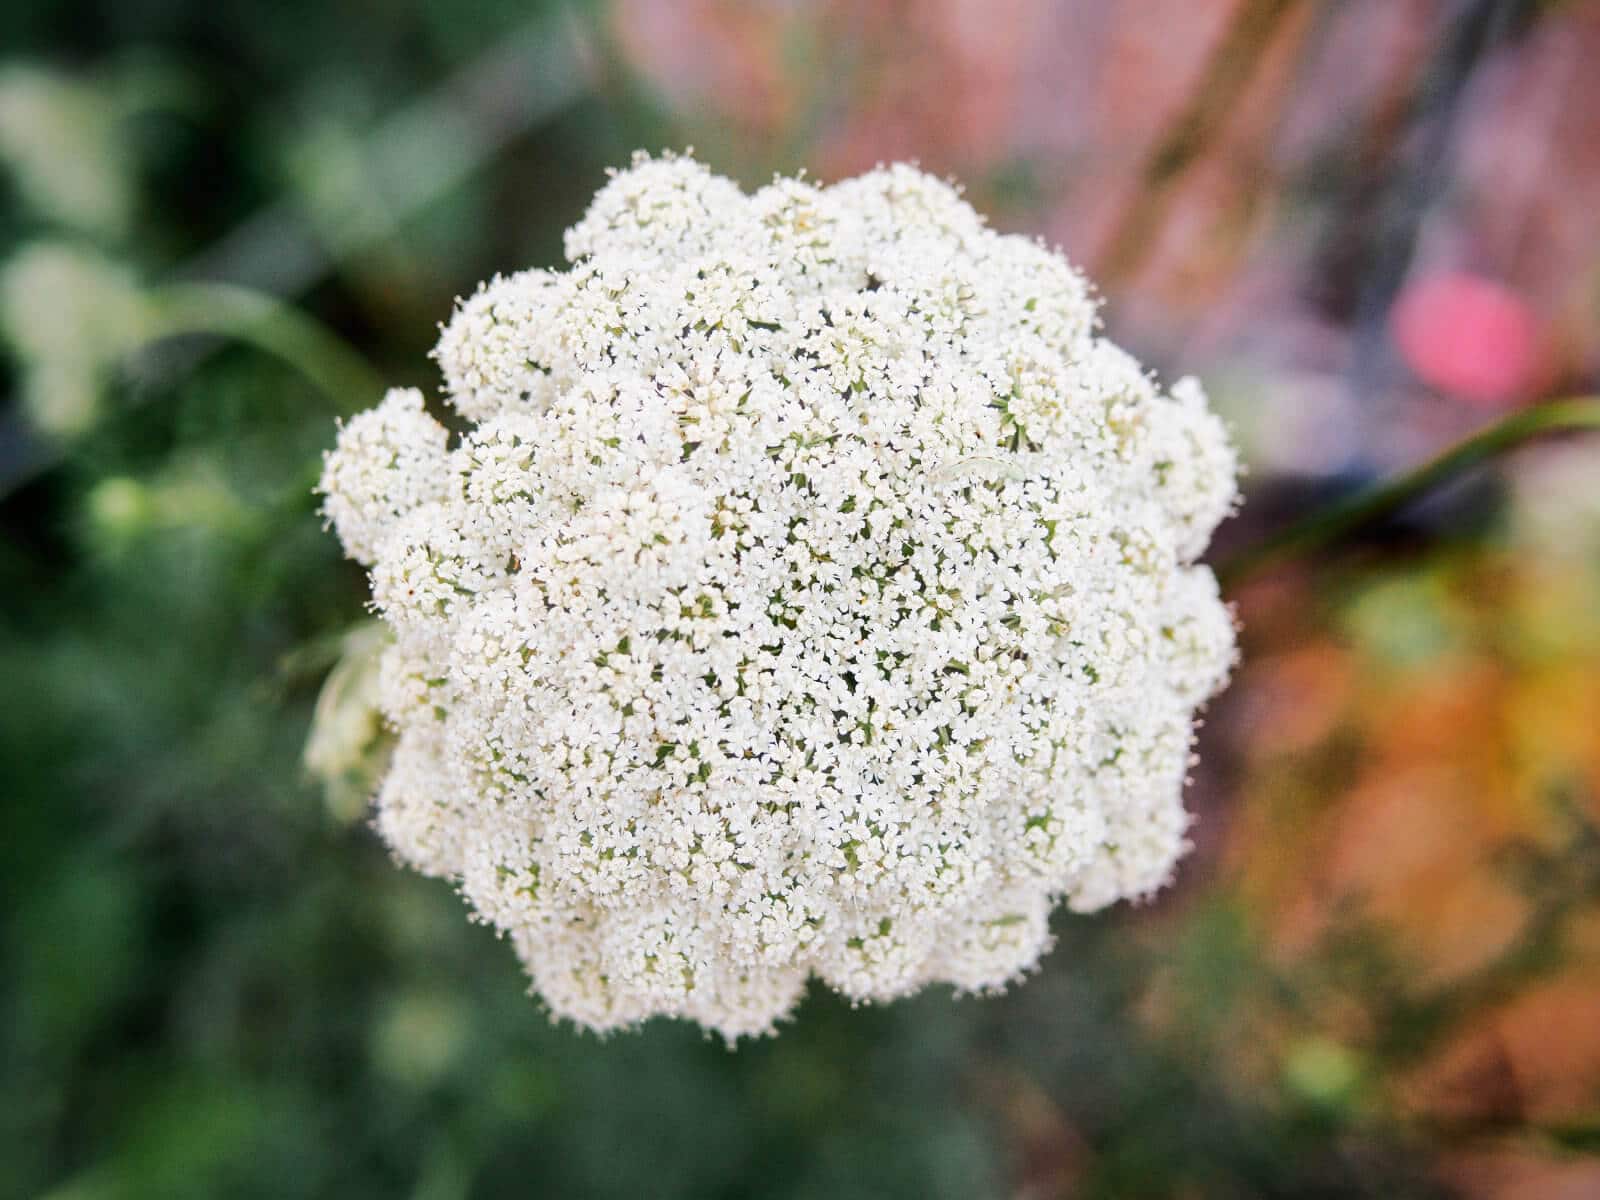 Carrot flowers resemble Queen Anne's lace umbels